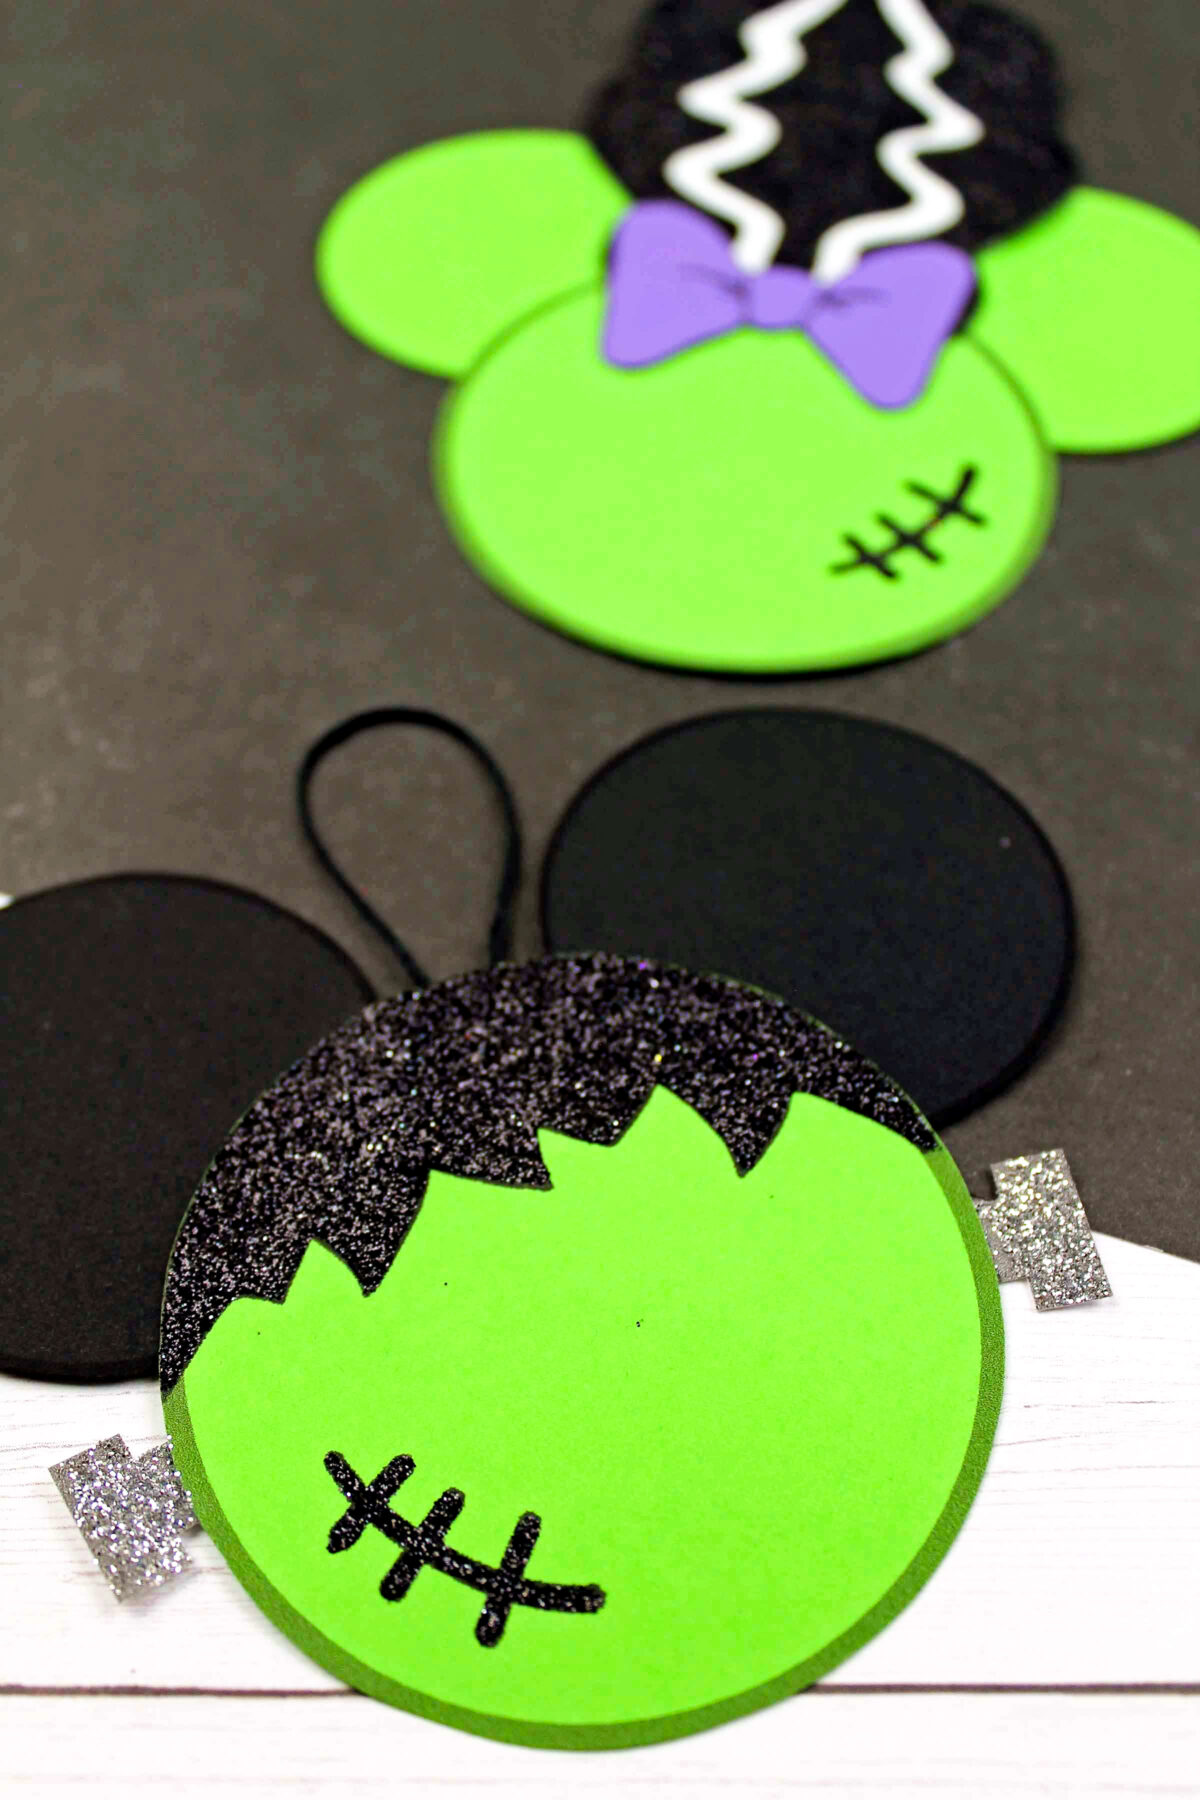 Make this easy DIY Frankenstein Mickey ears ornament for your Christmas tree. Easy, fun, and festive craft for anyone into spooky things!